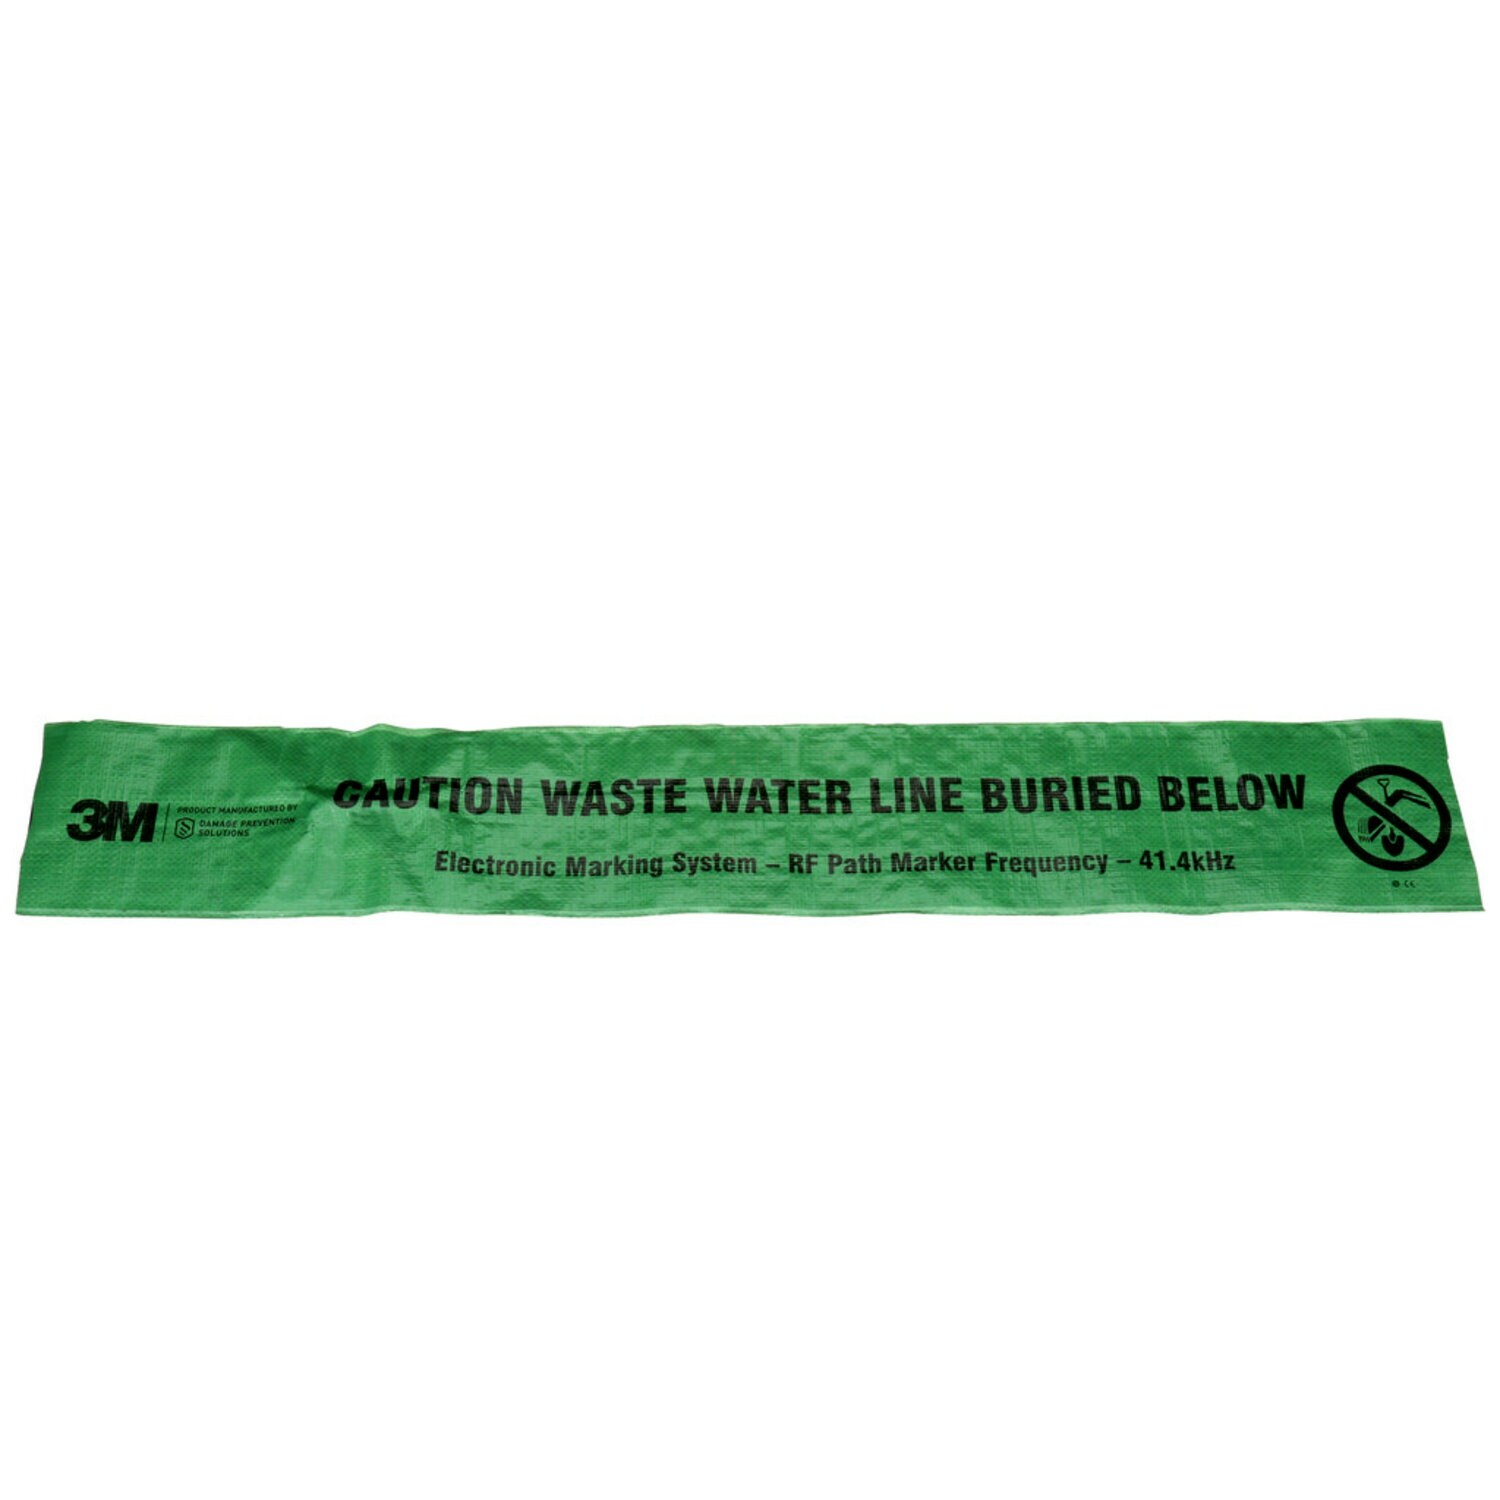 7100254633 - 3M Electronic Marking System (EMS) Caution Tape 7904, Green, 6 in, WWater, 500 ft Roll, 1 Roll/Box